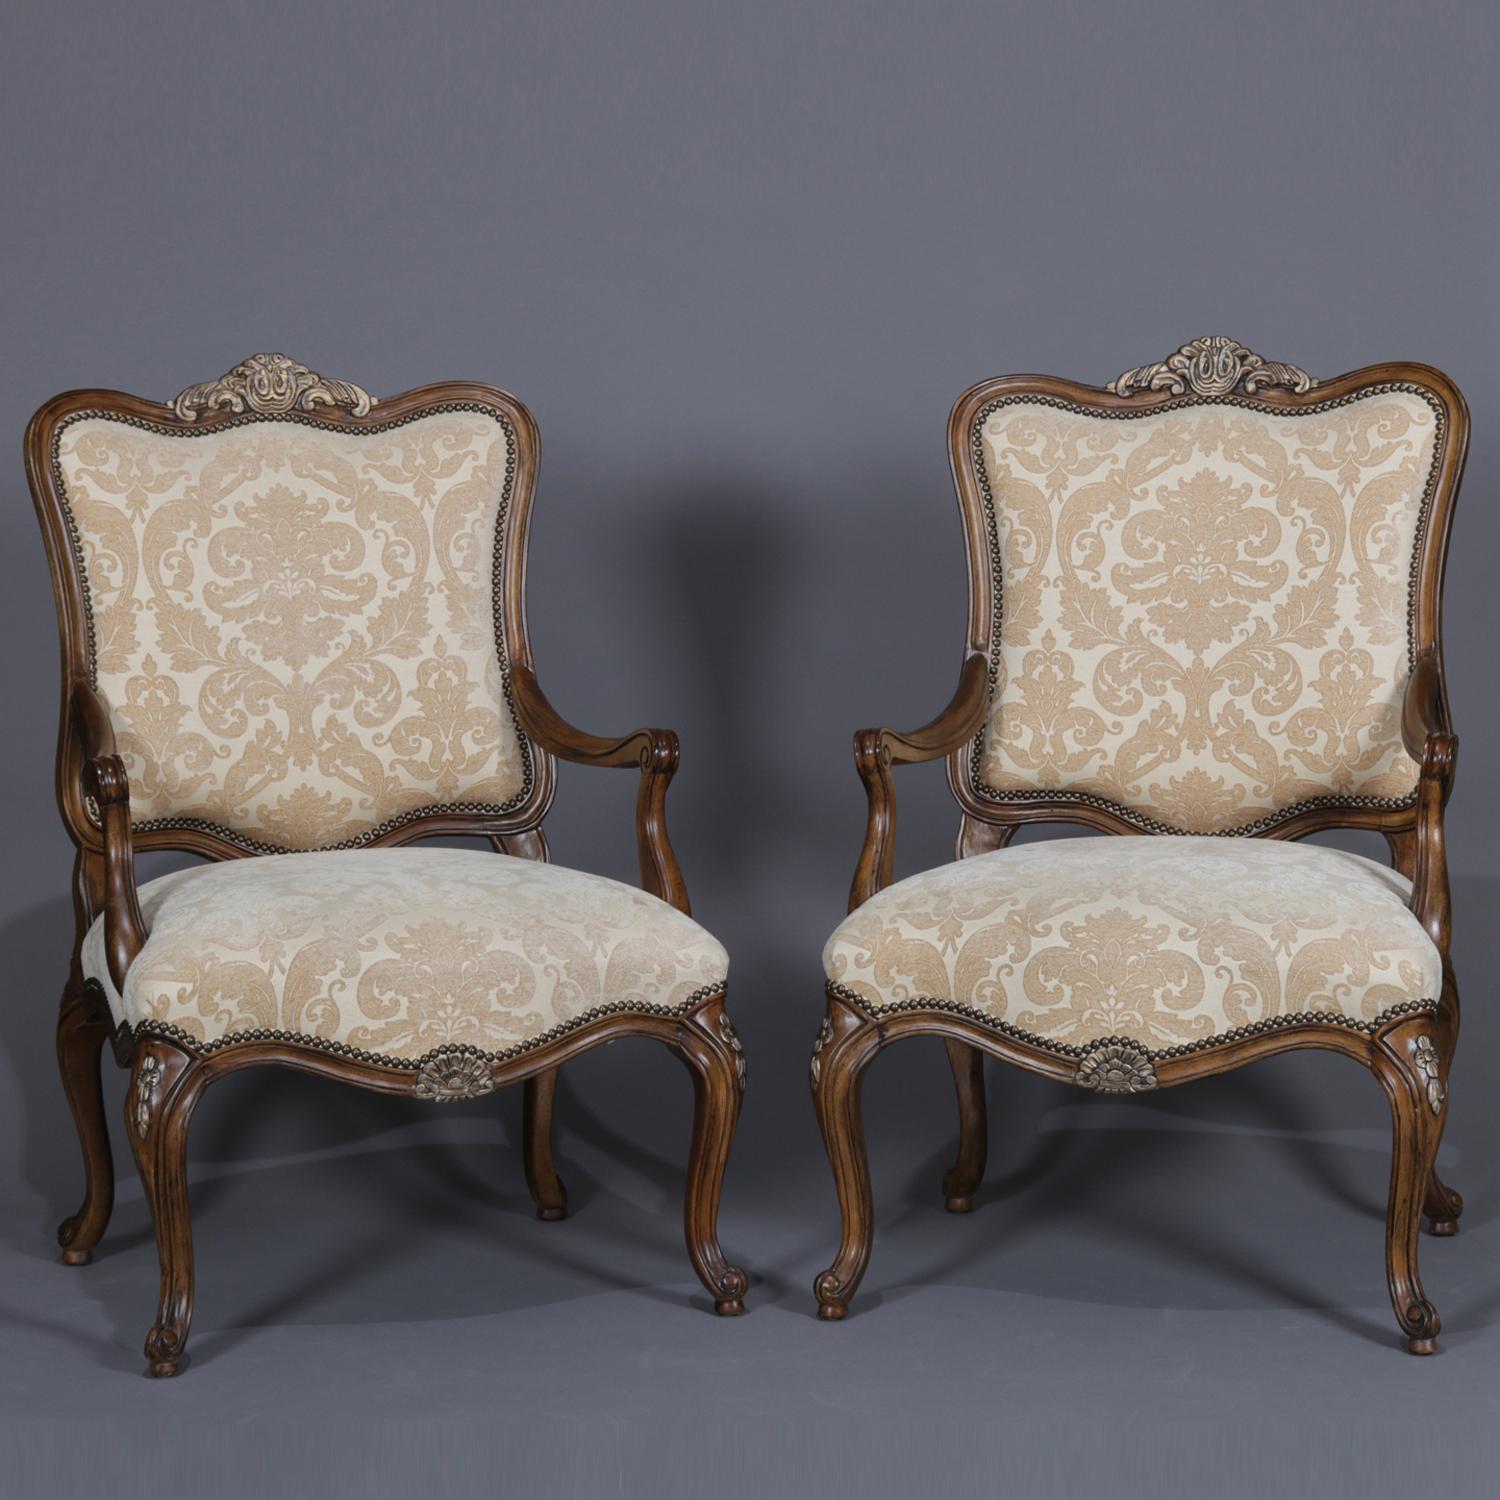 Pair of French Louis XV Style Carved and Gilt Mahogany Fauteuil Chairs 1